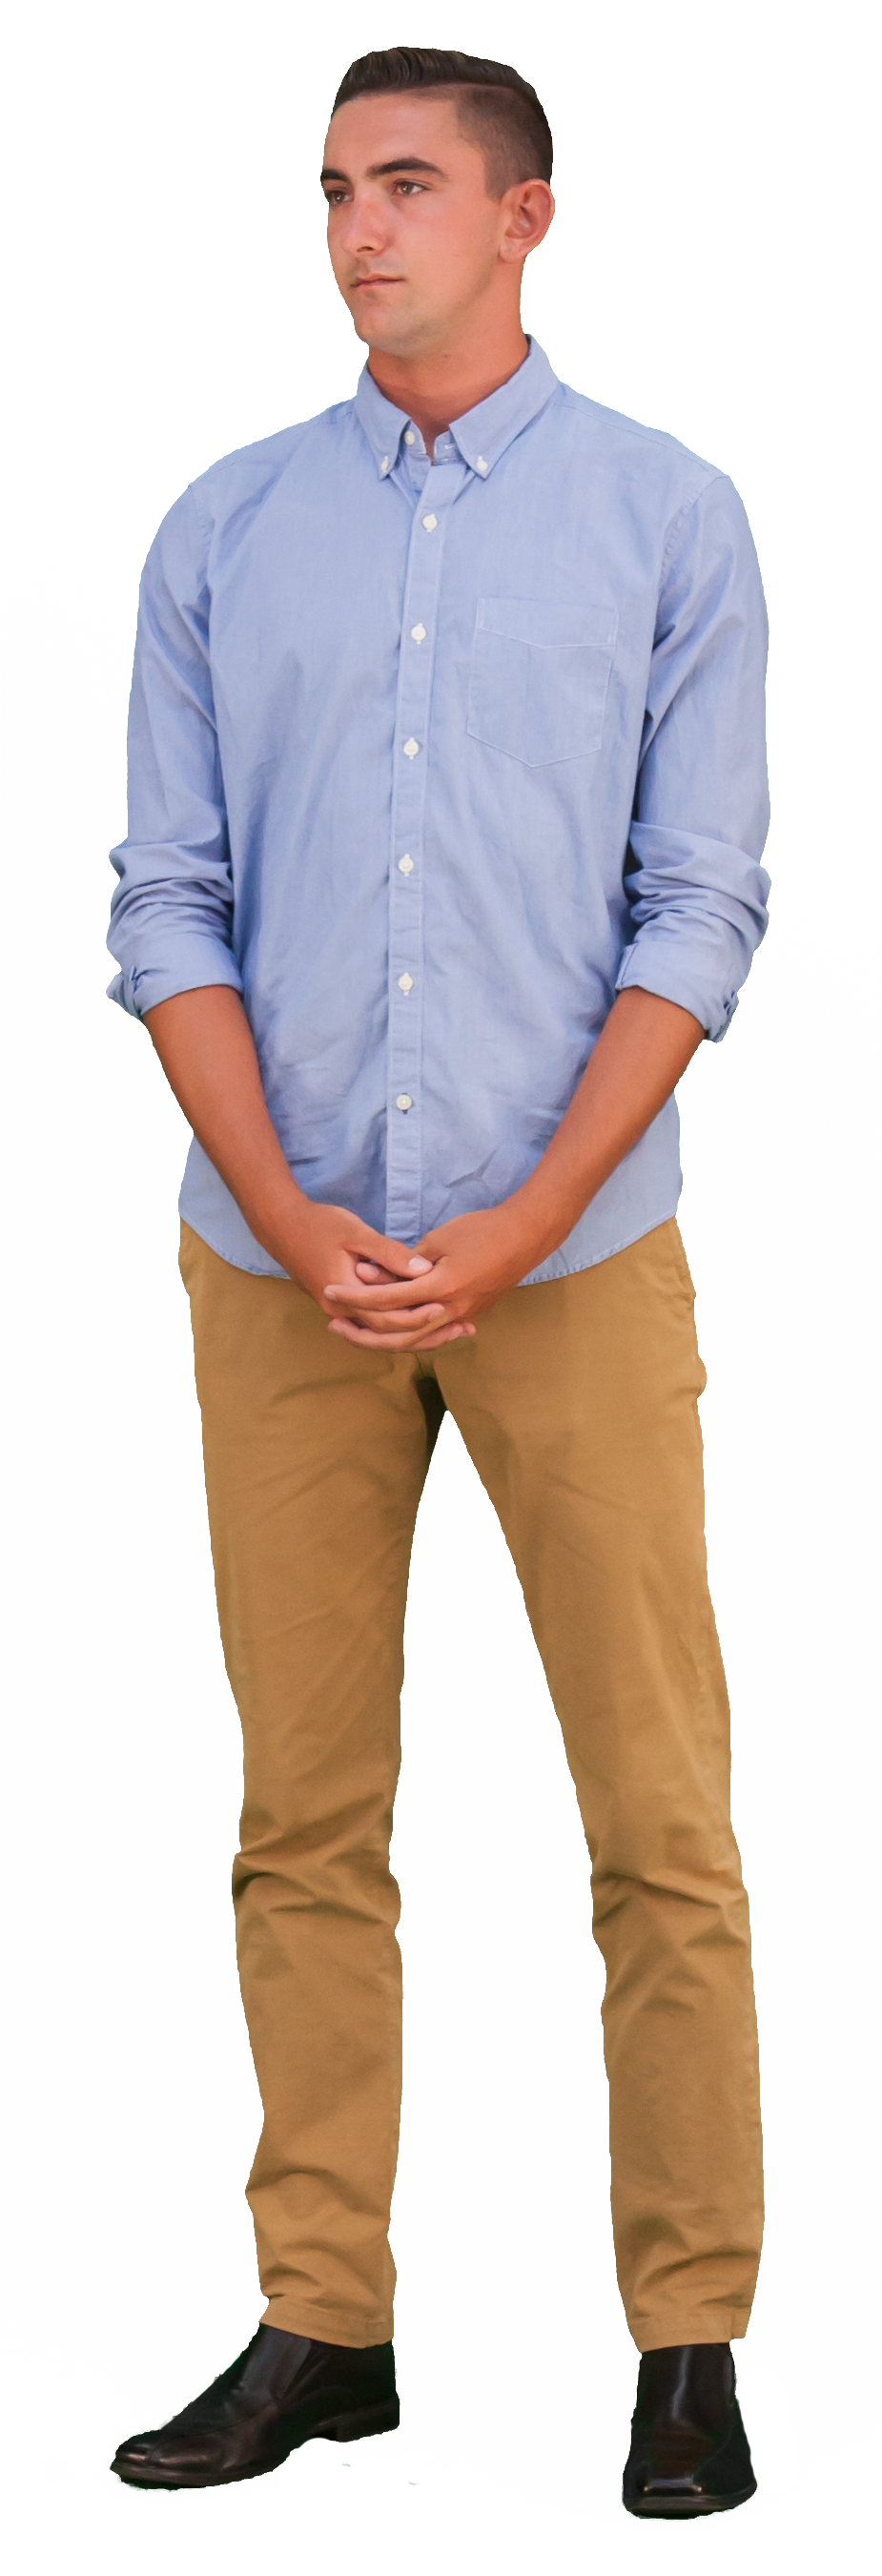 Casual Man Standing Green Screen Background